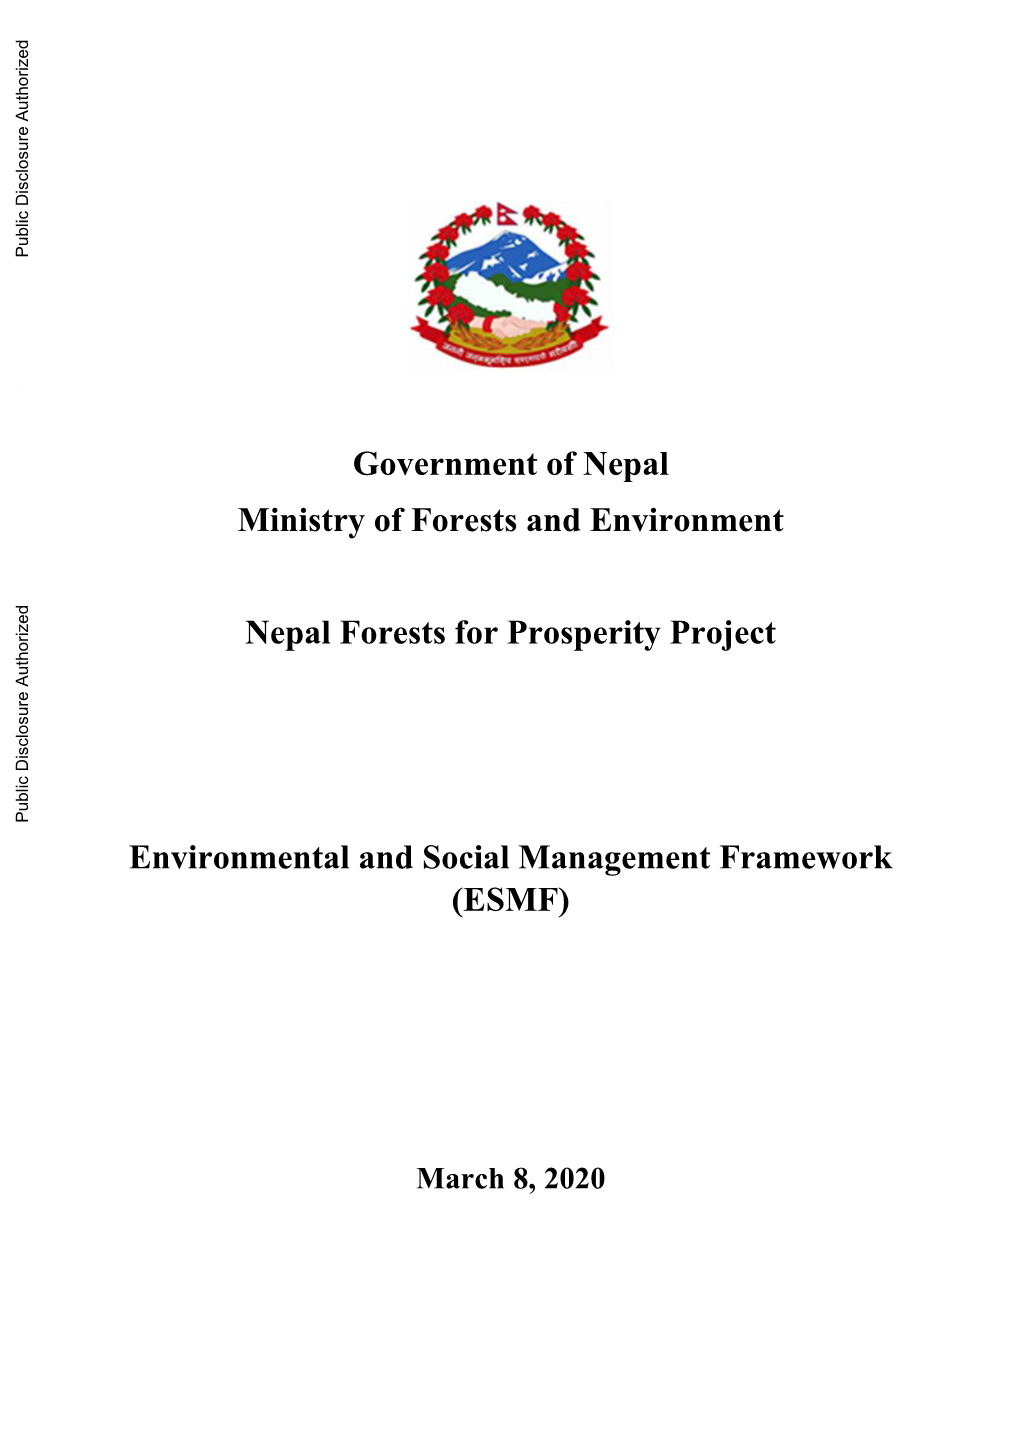 Environment and Social Management Framework (ESMF) Has Been Prepared for the Forests for Prosperity (FFP) Project